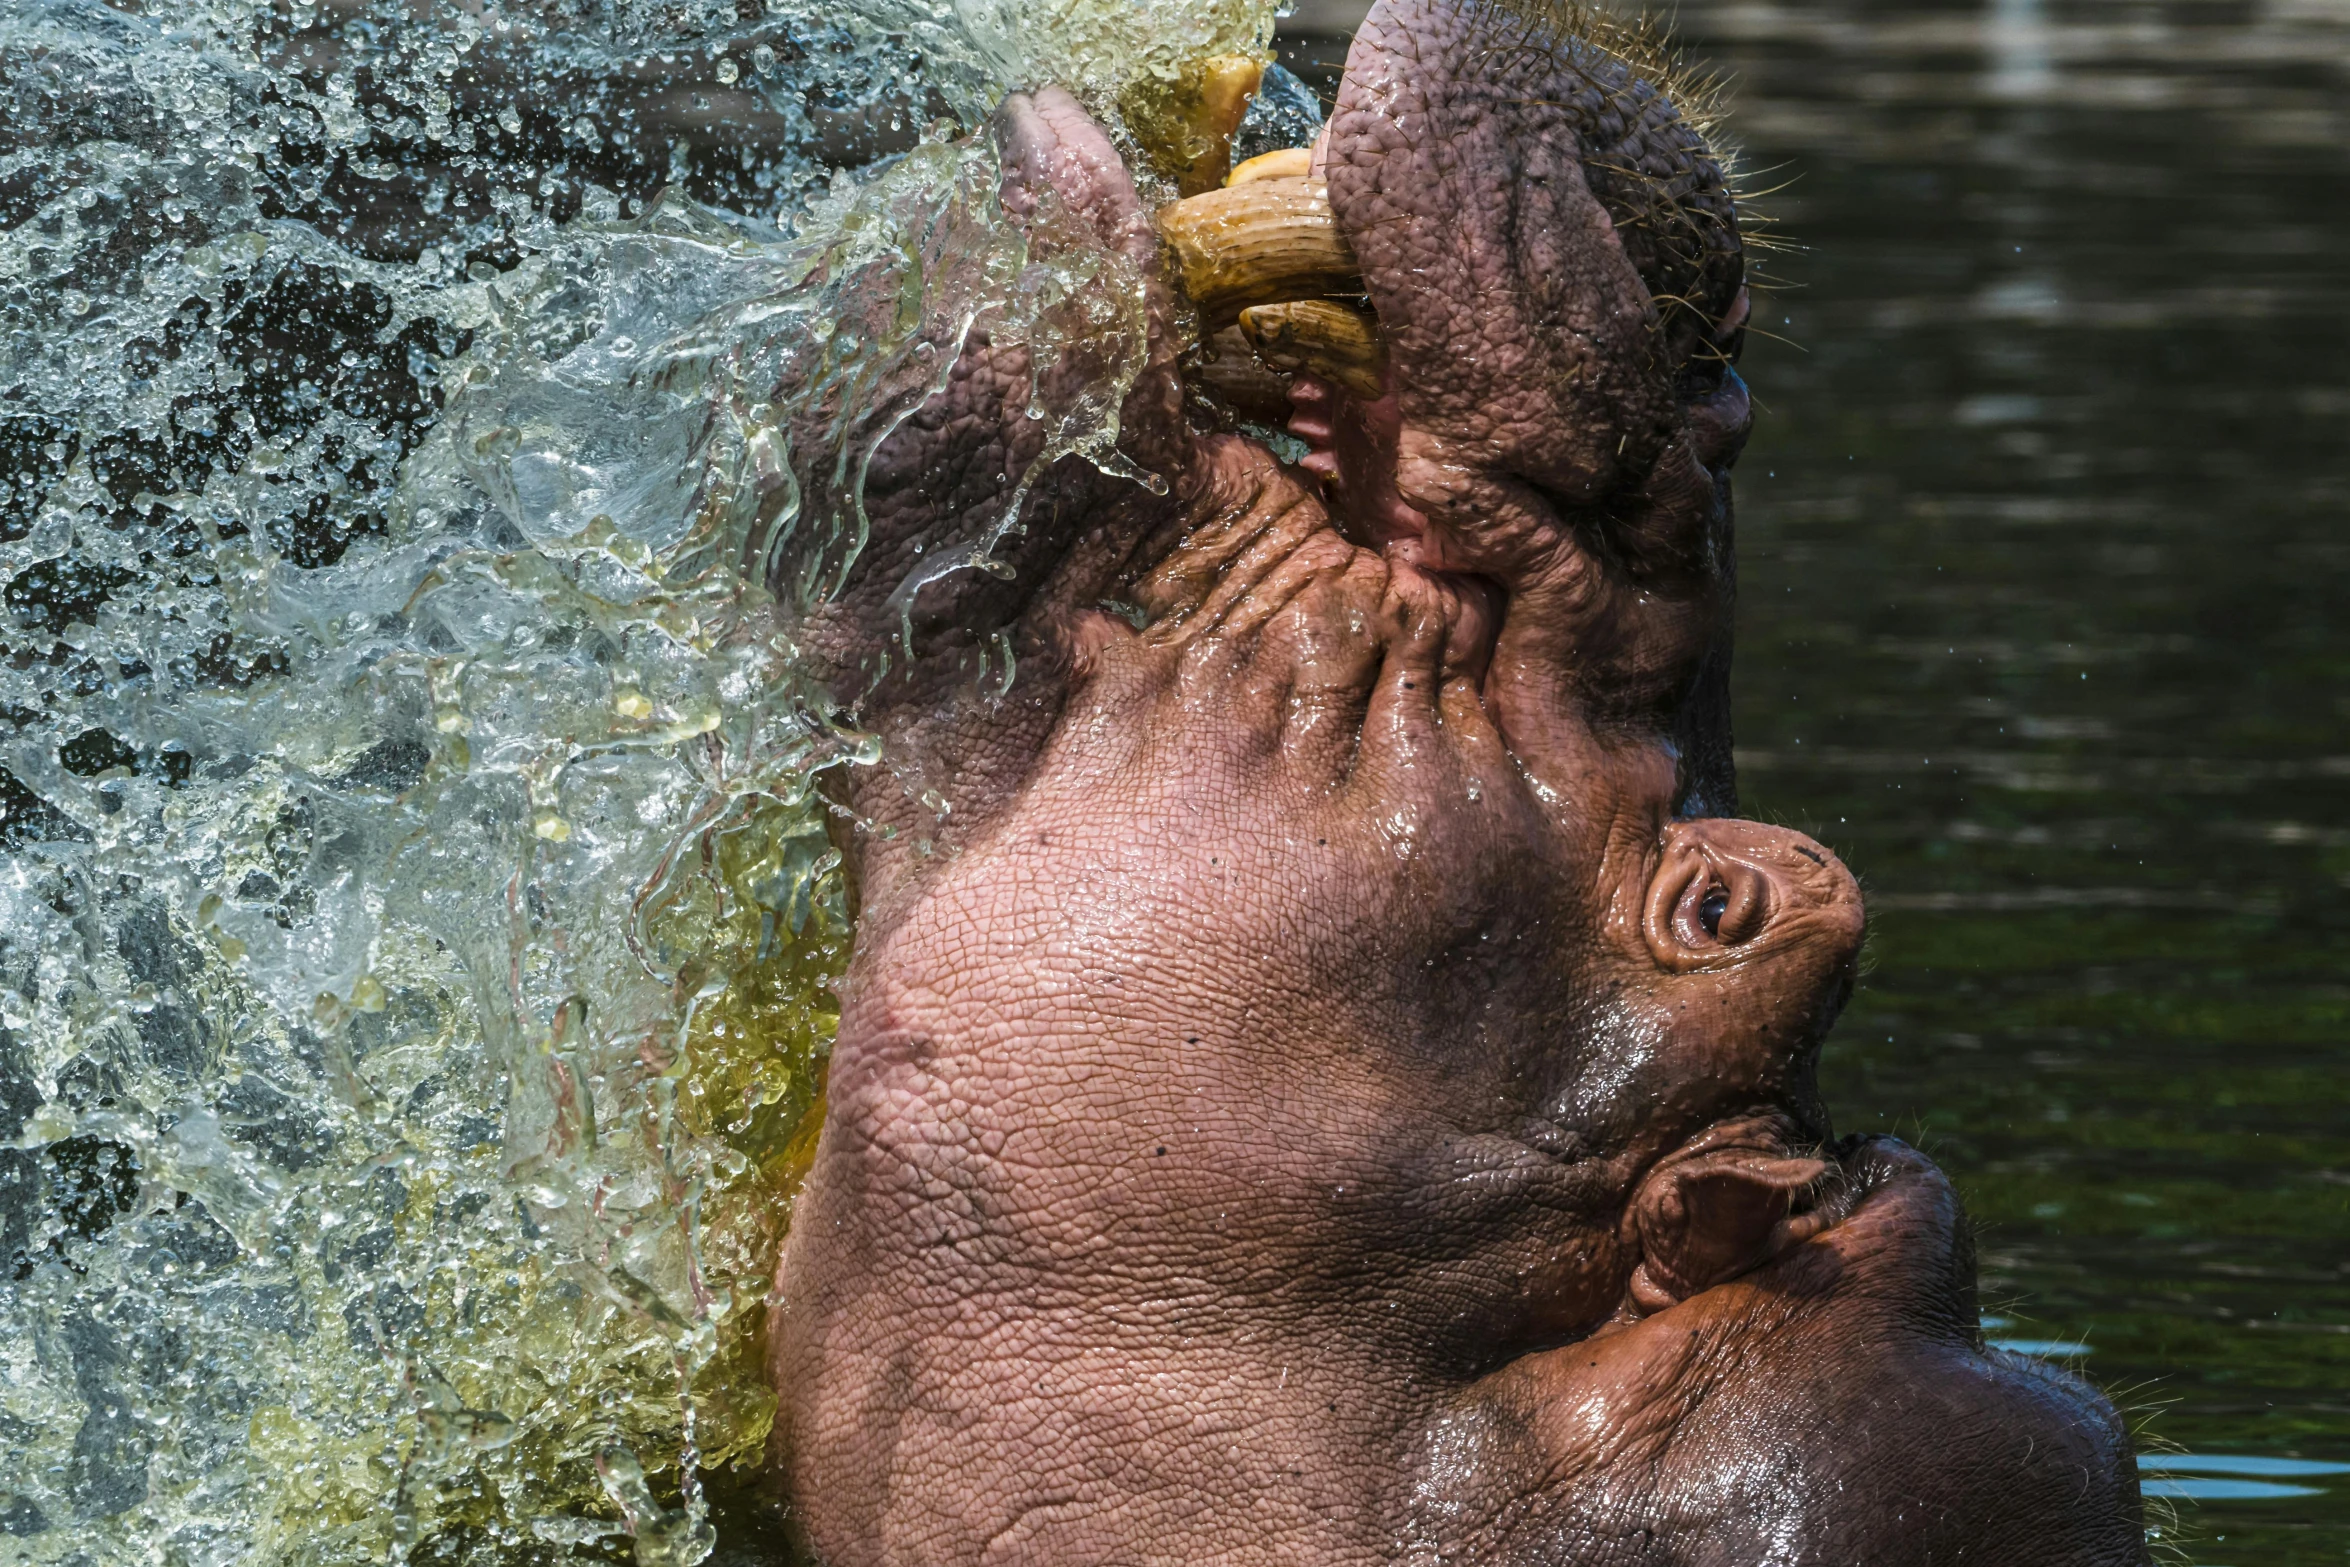 a man is splashing on the back of an elephant in a body of water